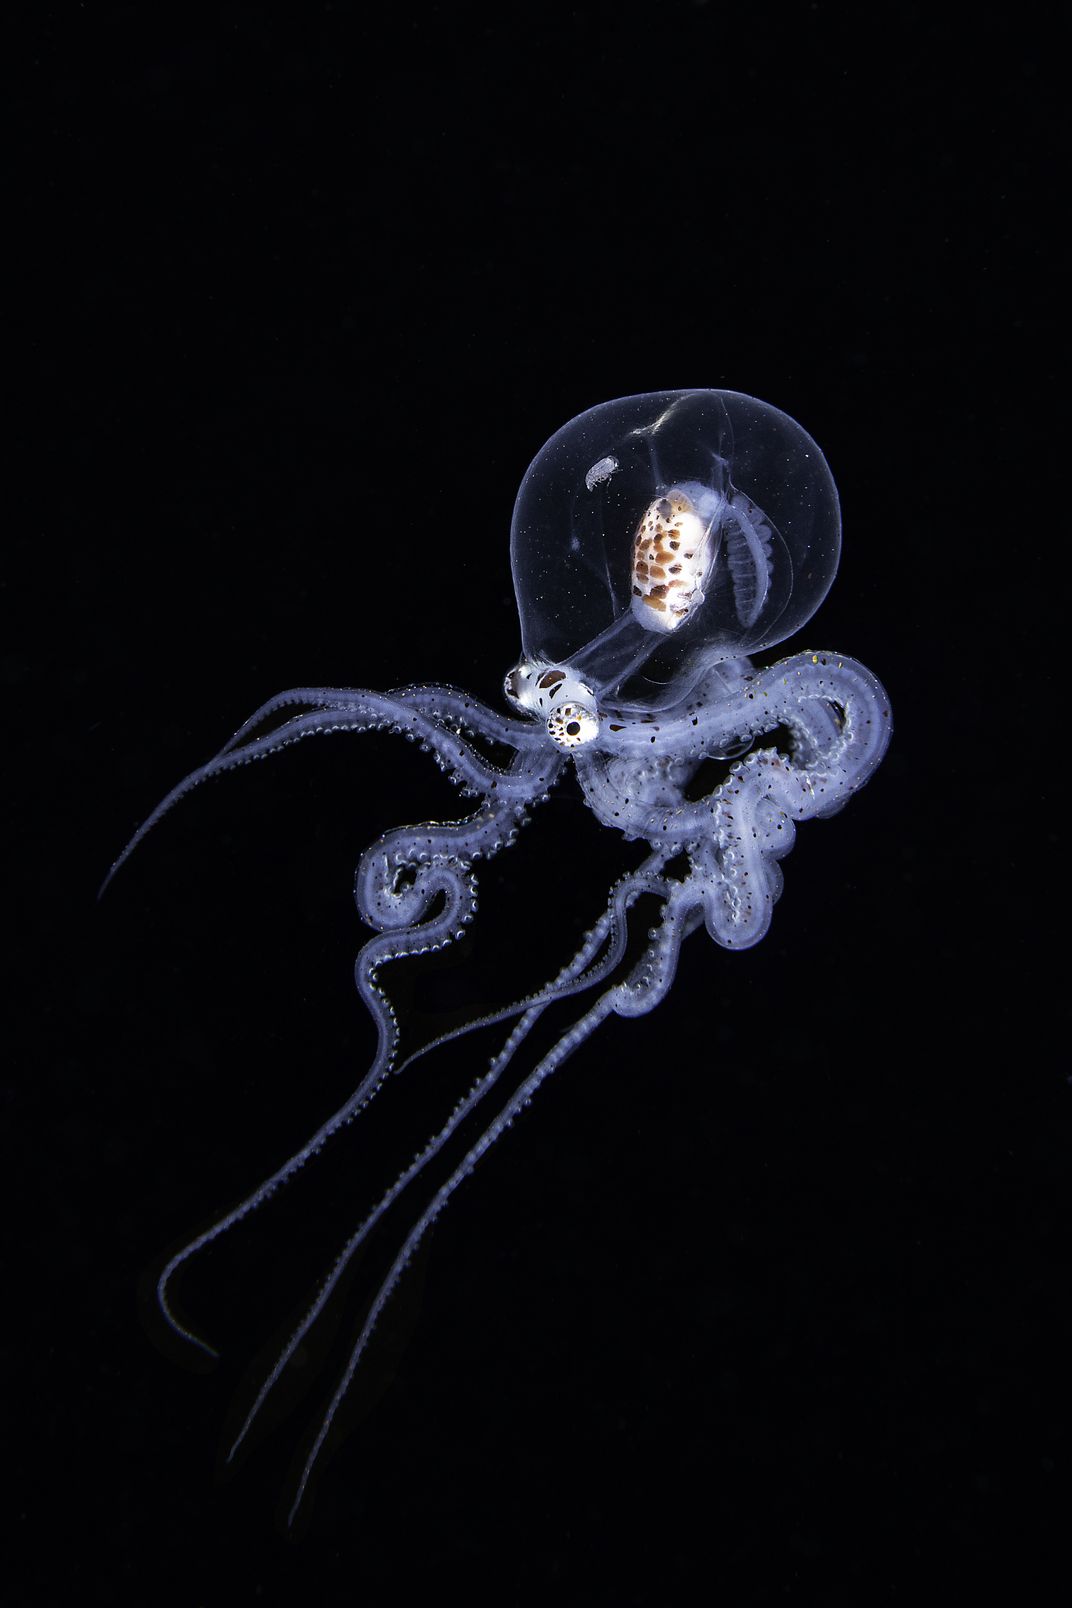 a see-through octopus against darkness